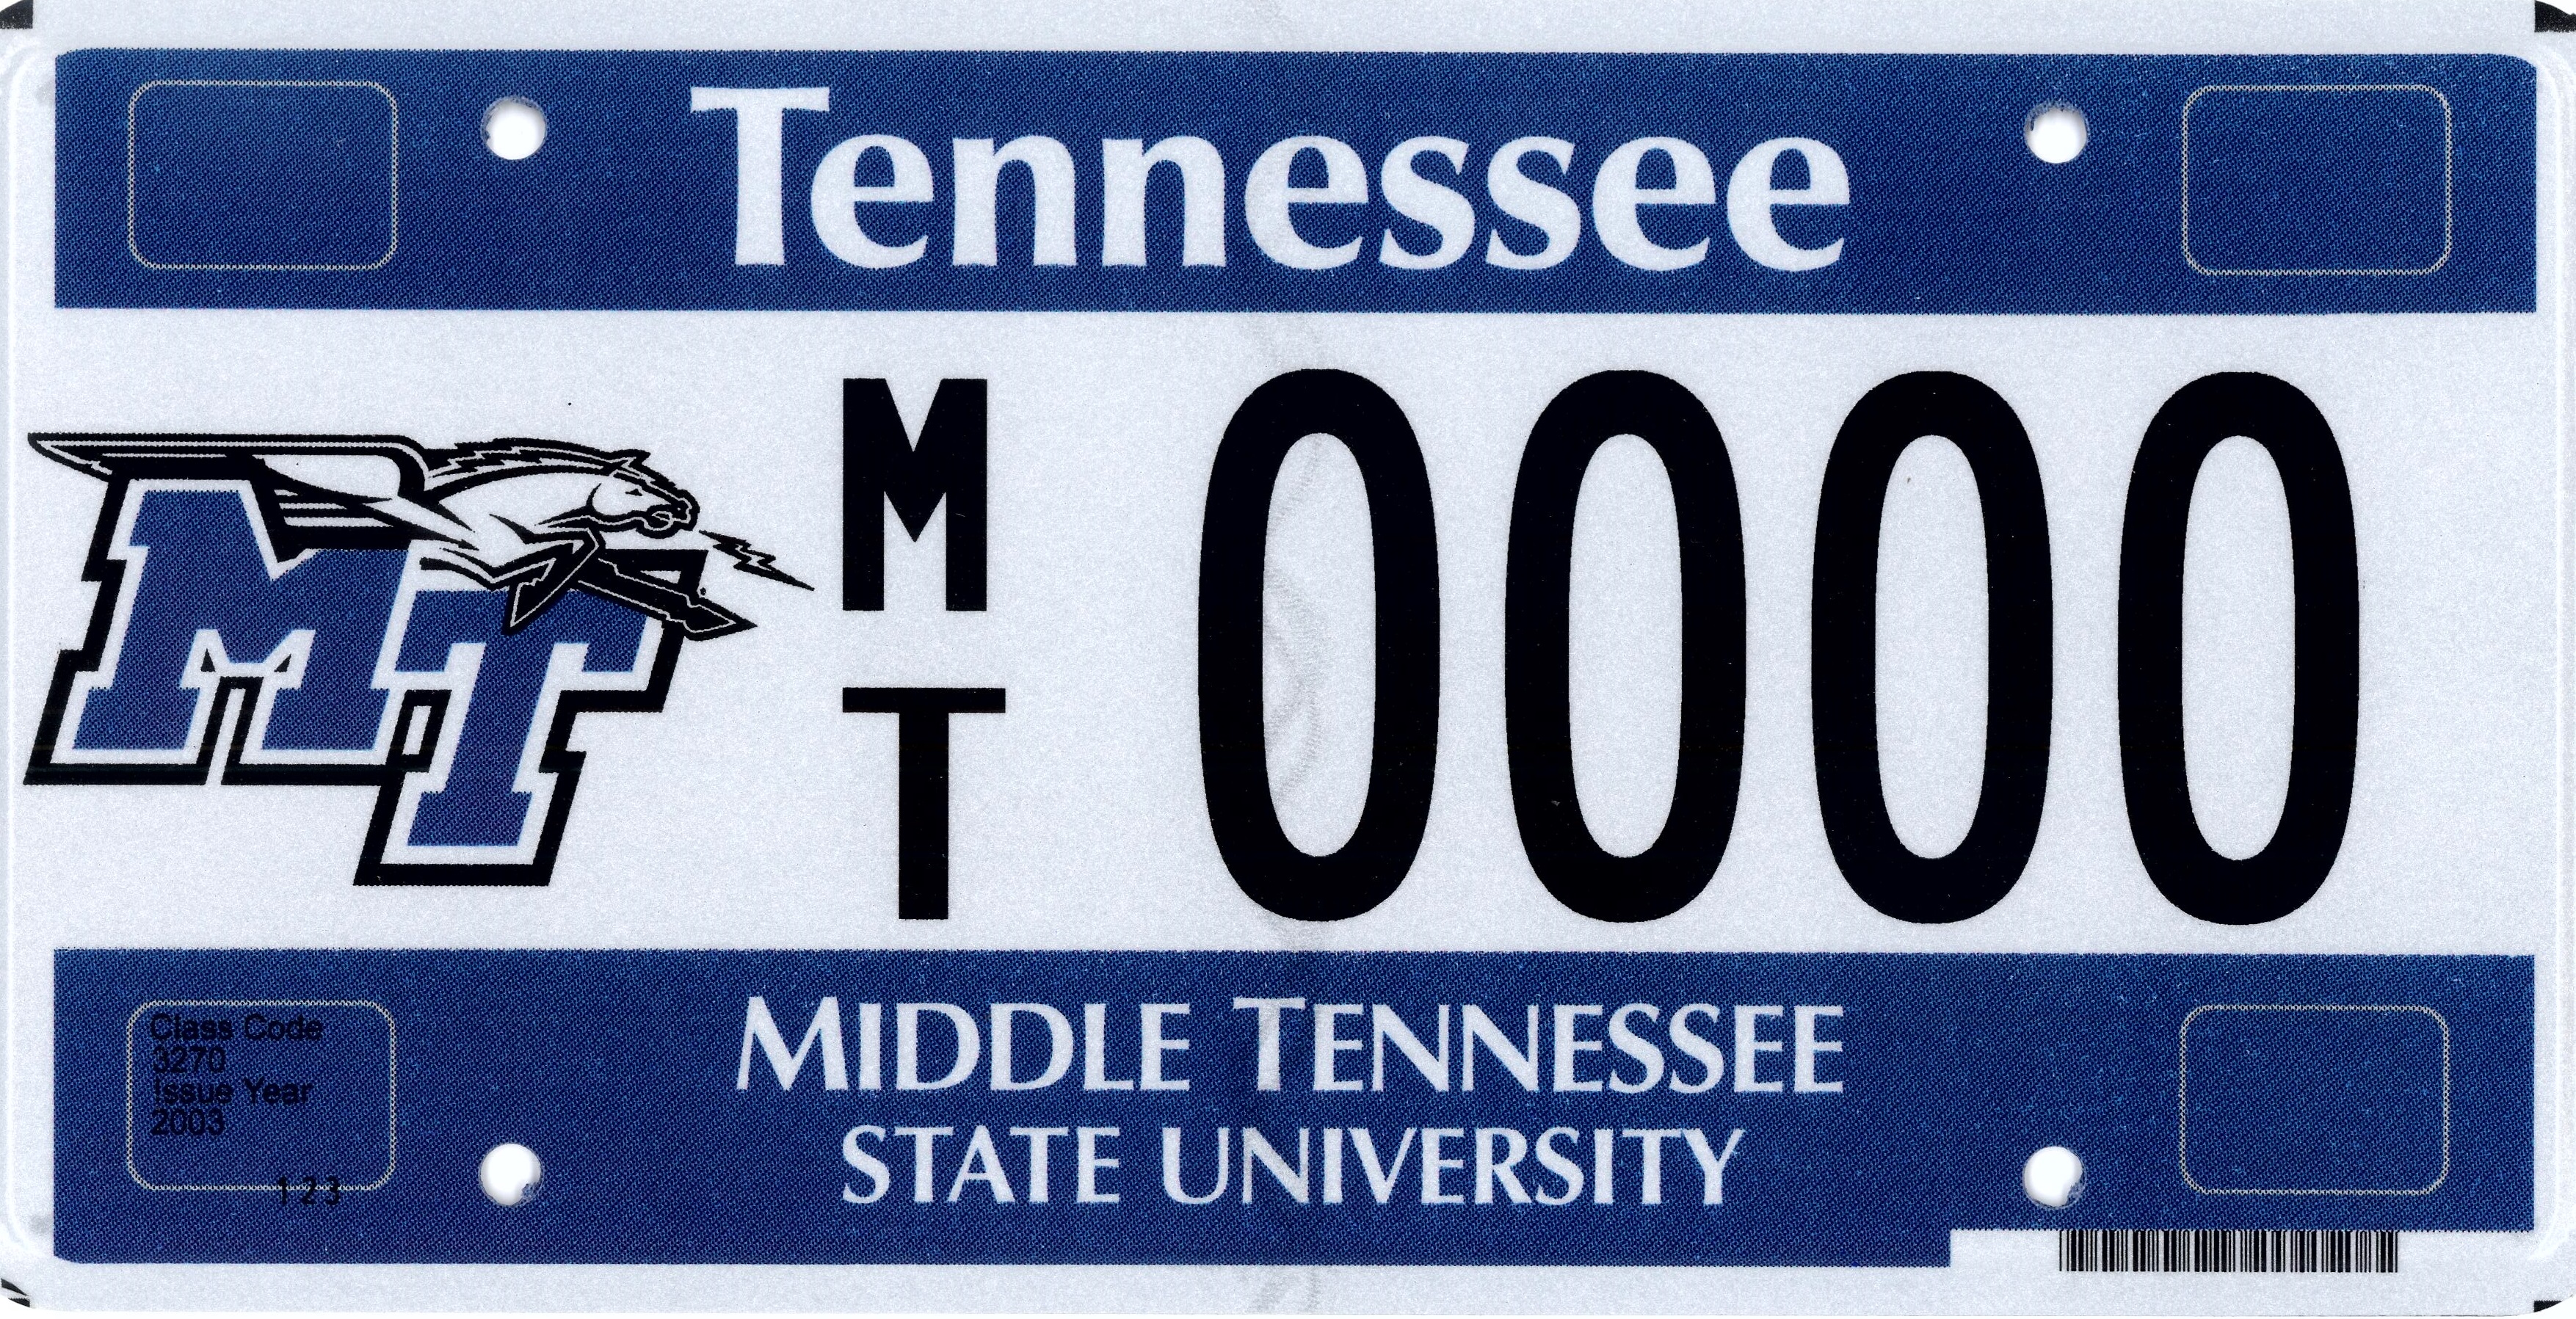 Middle_Tennessee_State_University_cls_3270.jpg